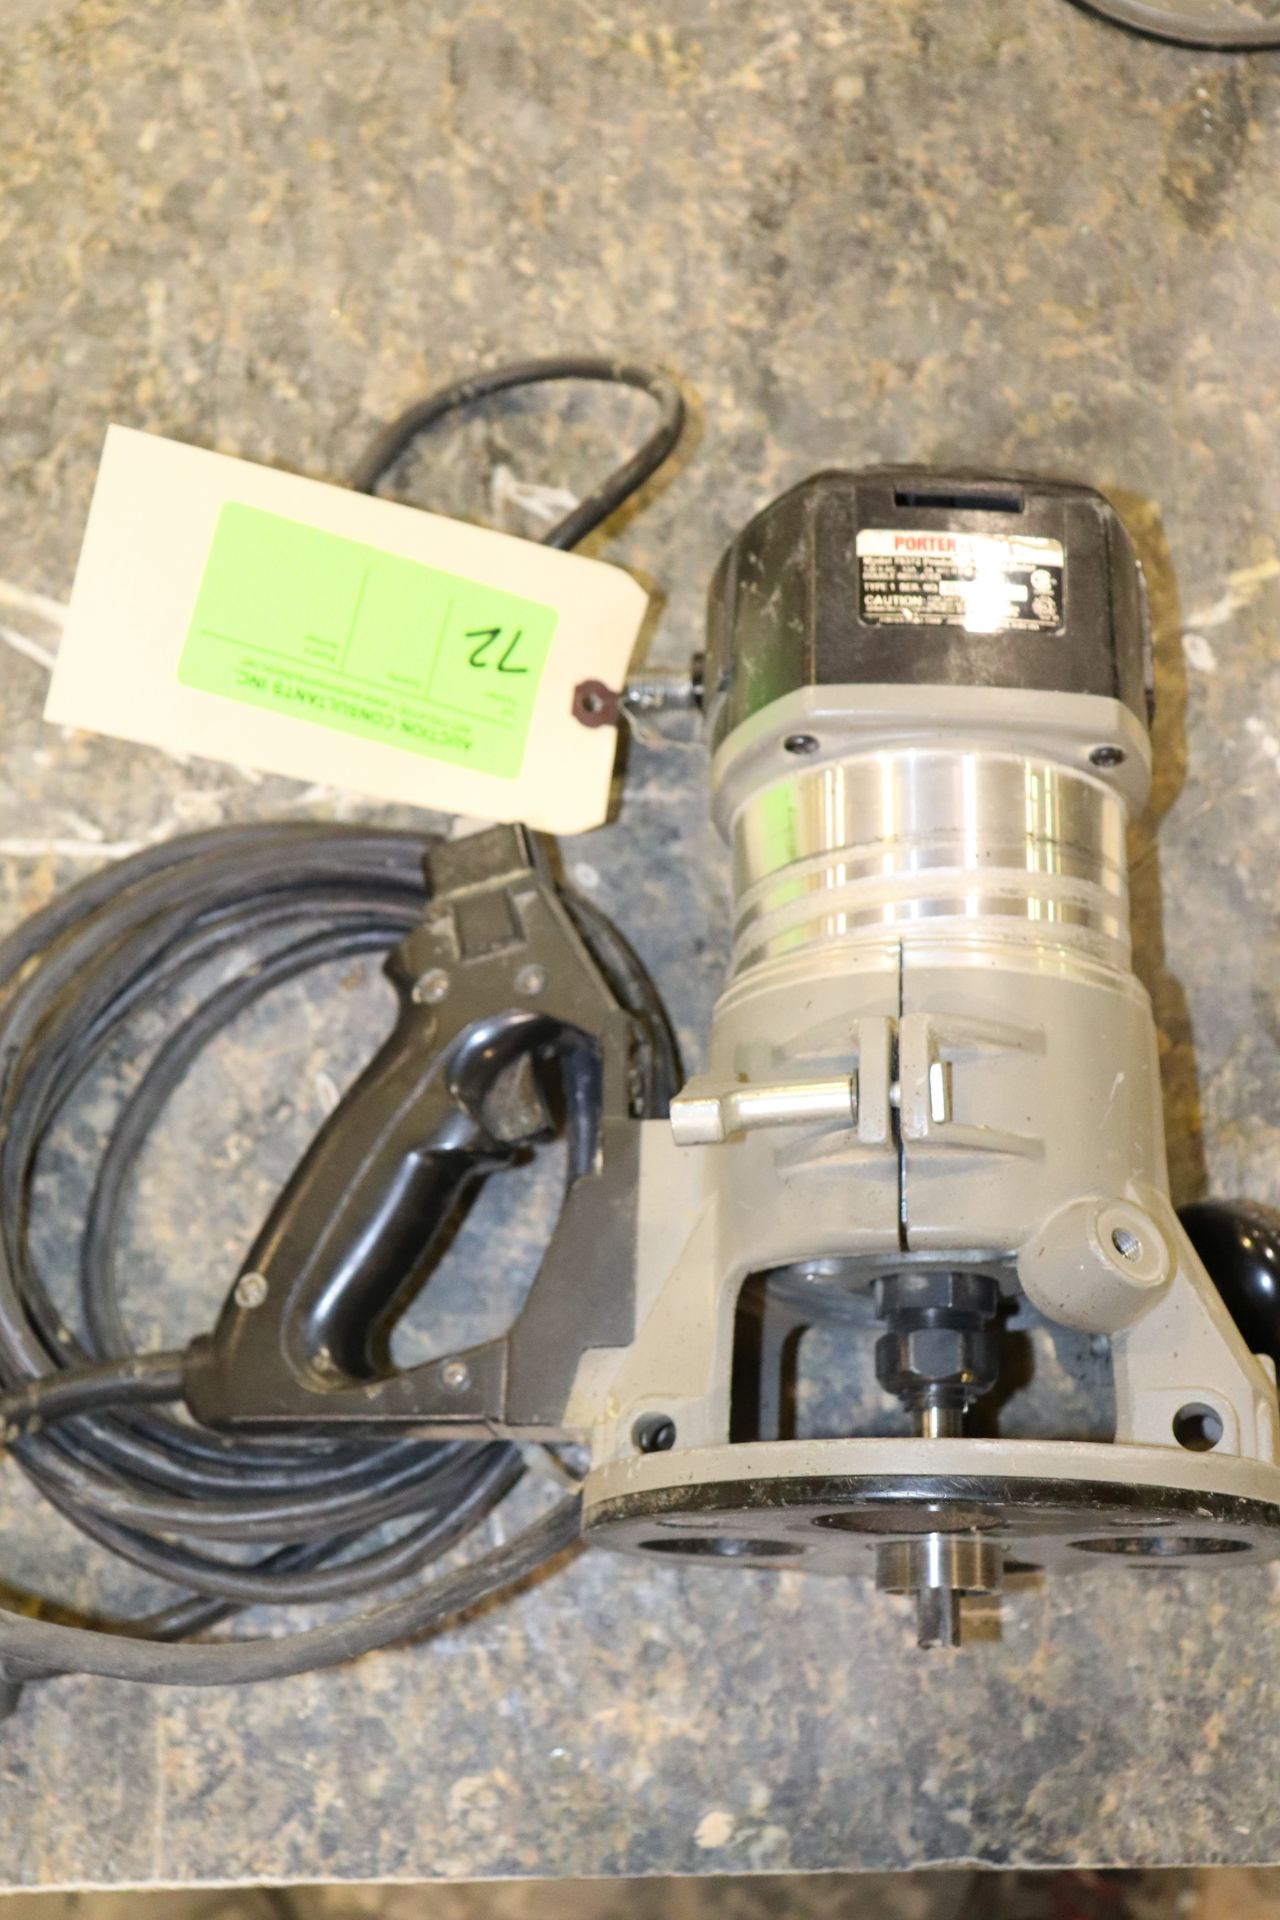 Porter Cable model 75372 production router motor with base router